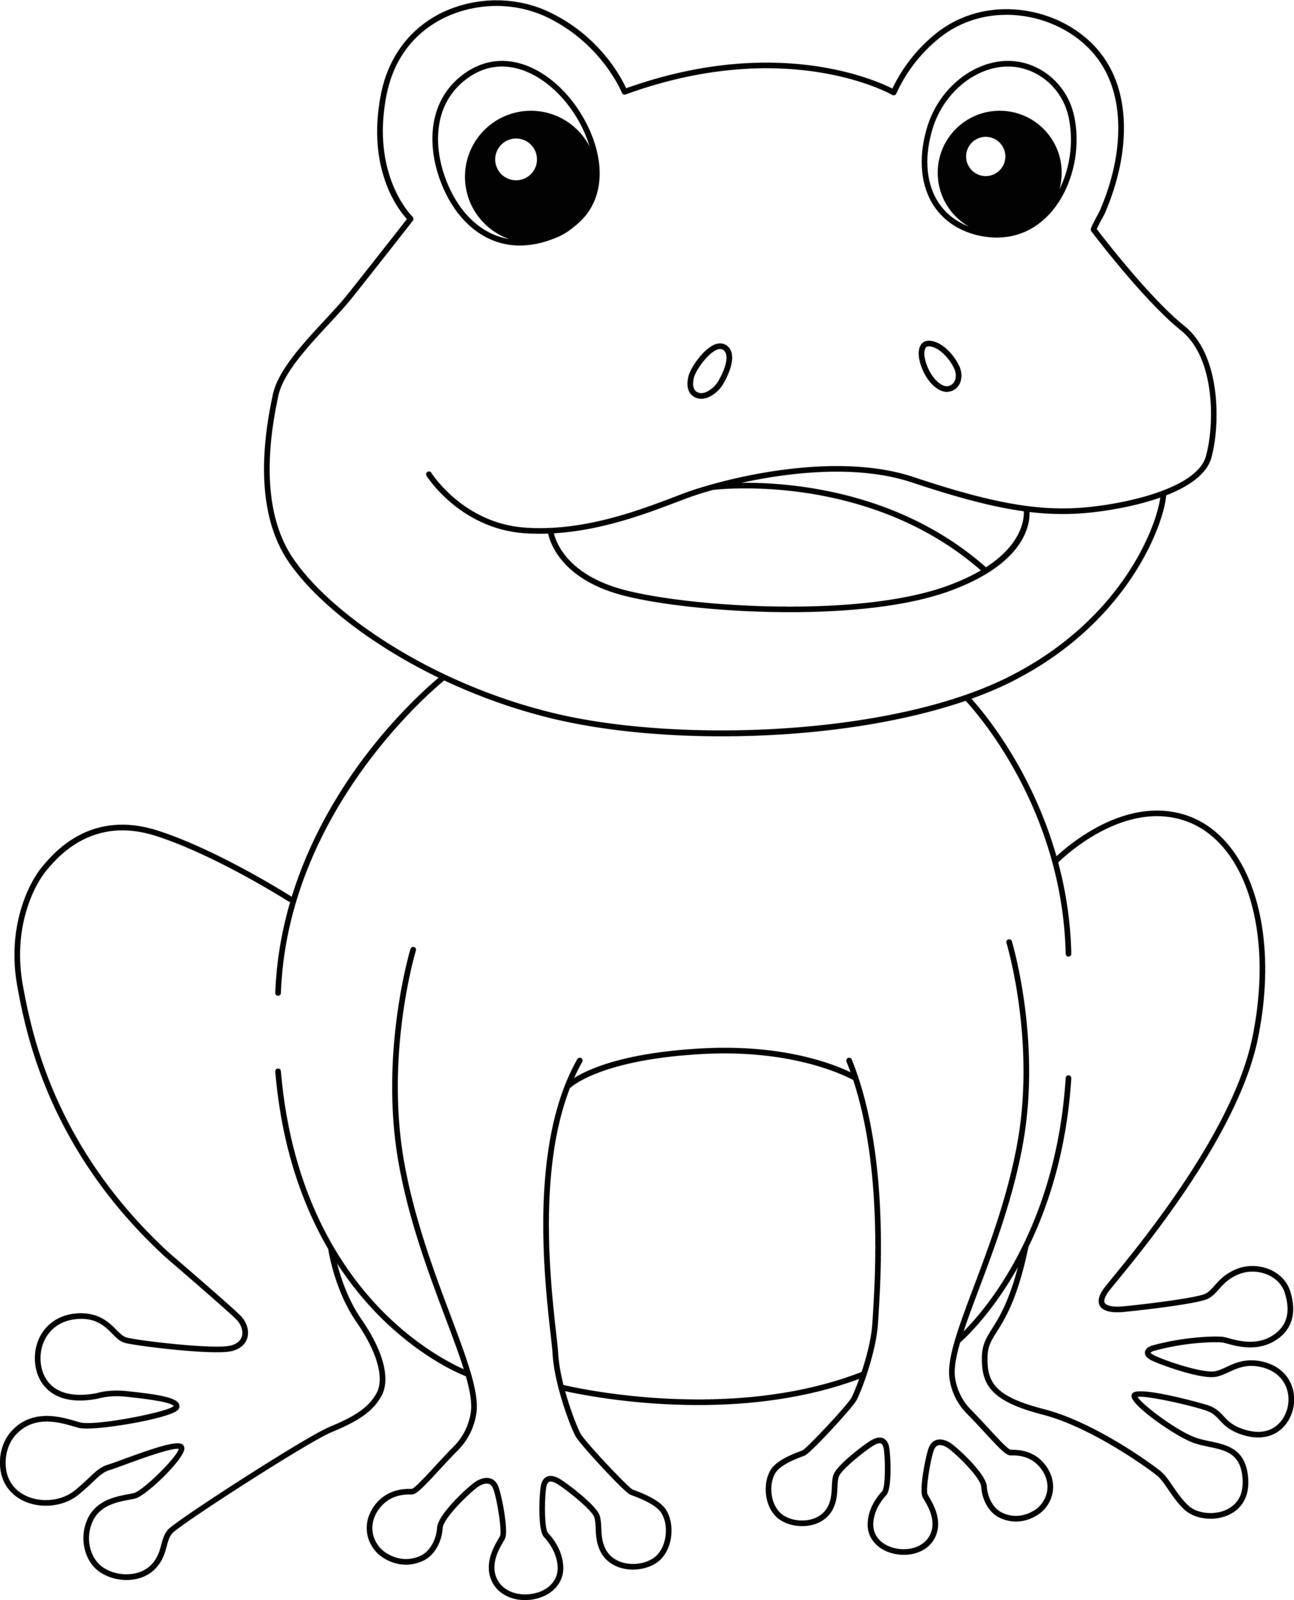 A cute and funny coloring page of a frog. Provides hours of coloring fun for children. To color, this page is very easy. Suitable for little kids and toddlers.